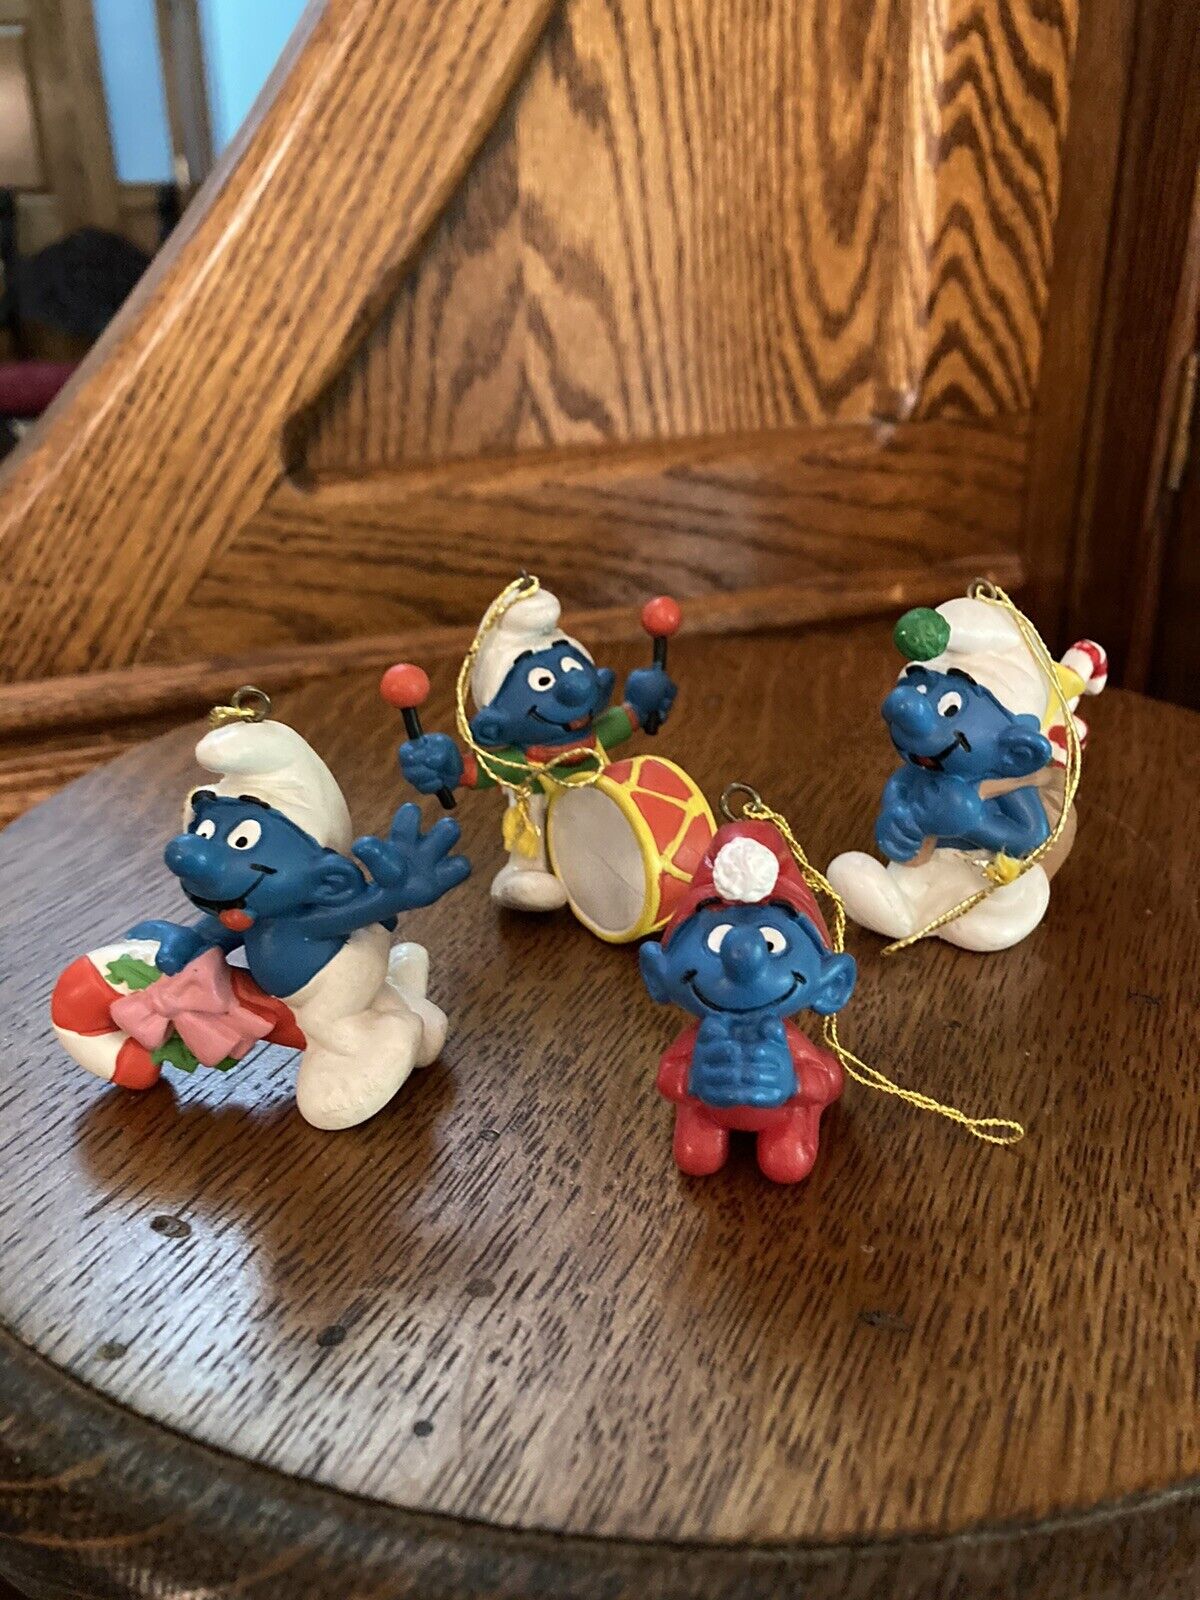 lot of 4 vintage Smurf Christmas ornaments 1981 Made In Portugal By Schleich